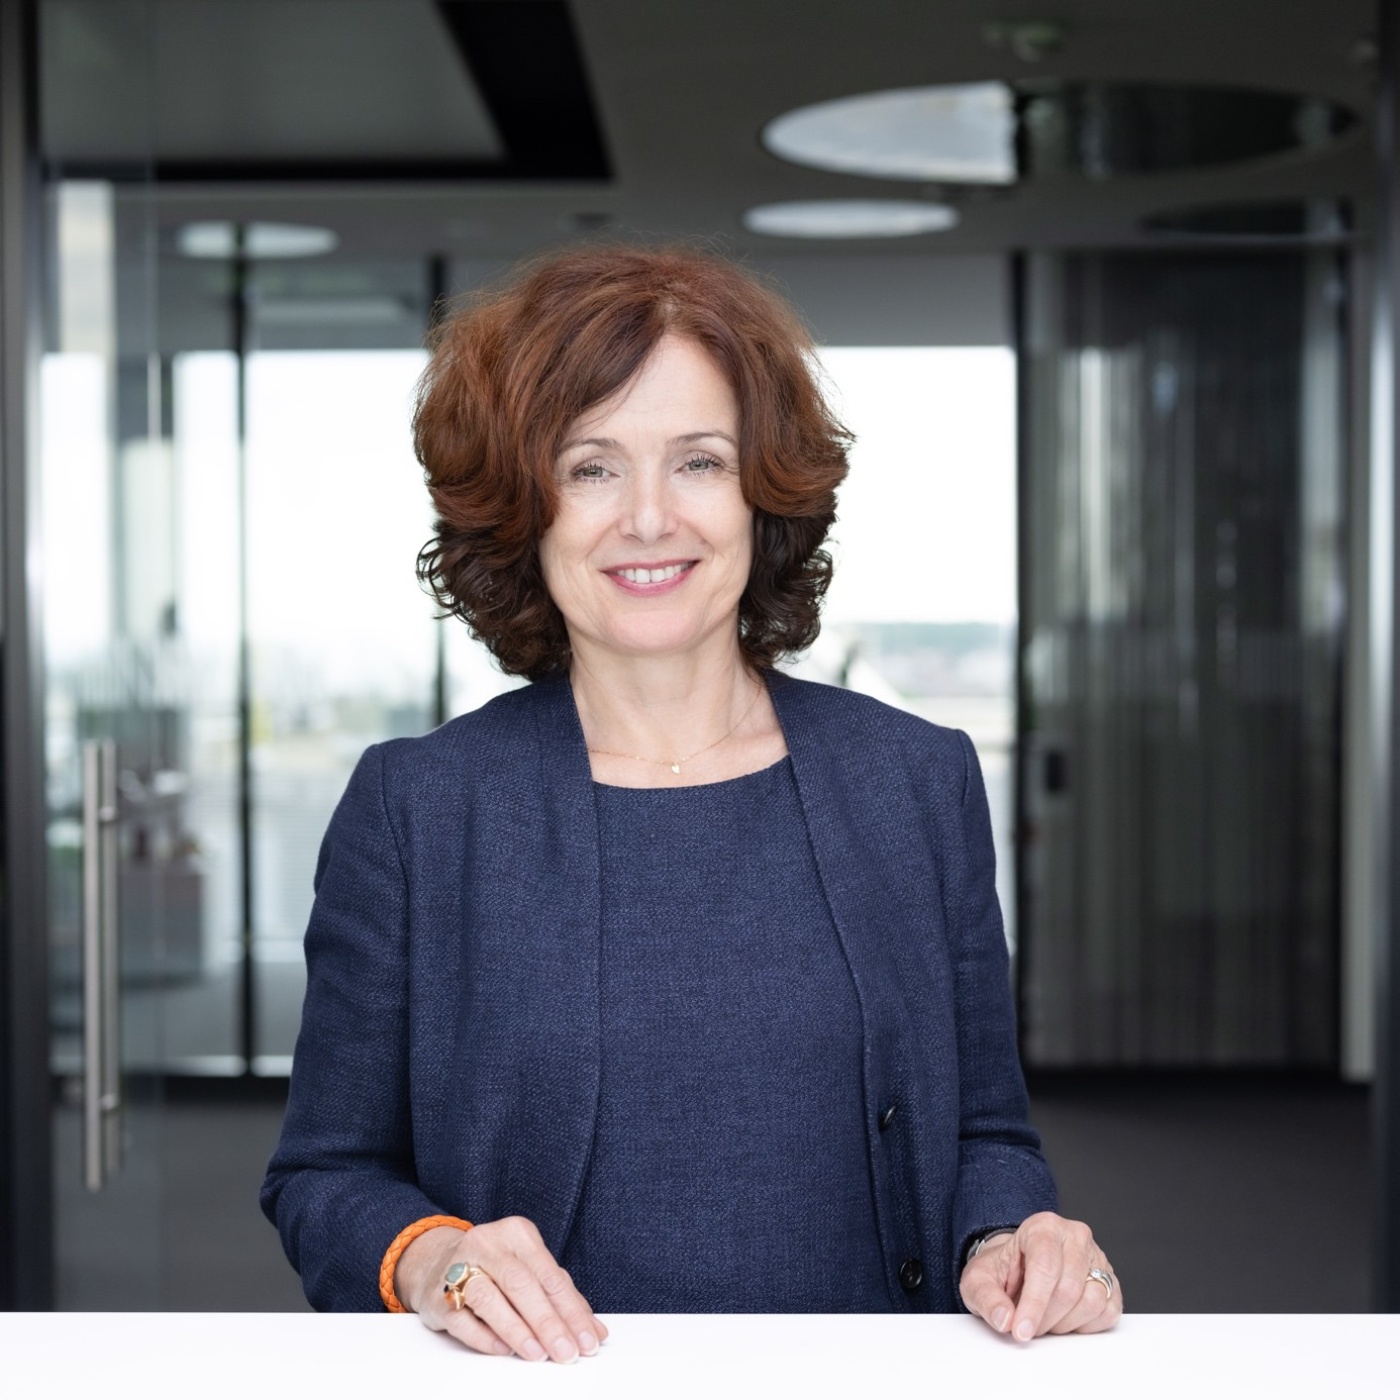 Emese Weissenbacher has been Chief Financial Officer since 2015 and Executive Vice President at MANN+HUMMEL since January 2020. 